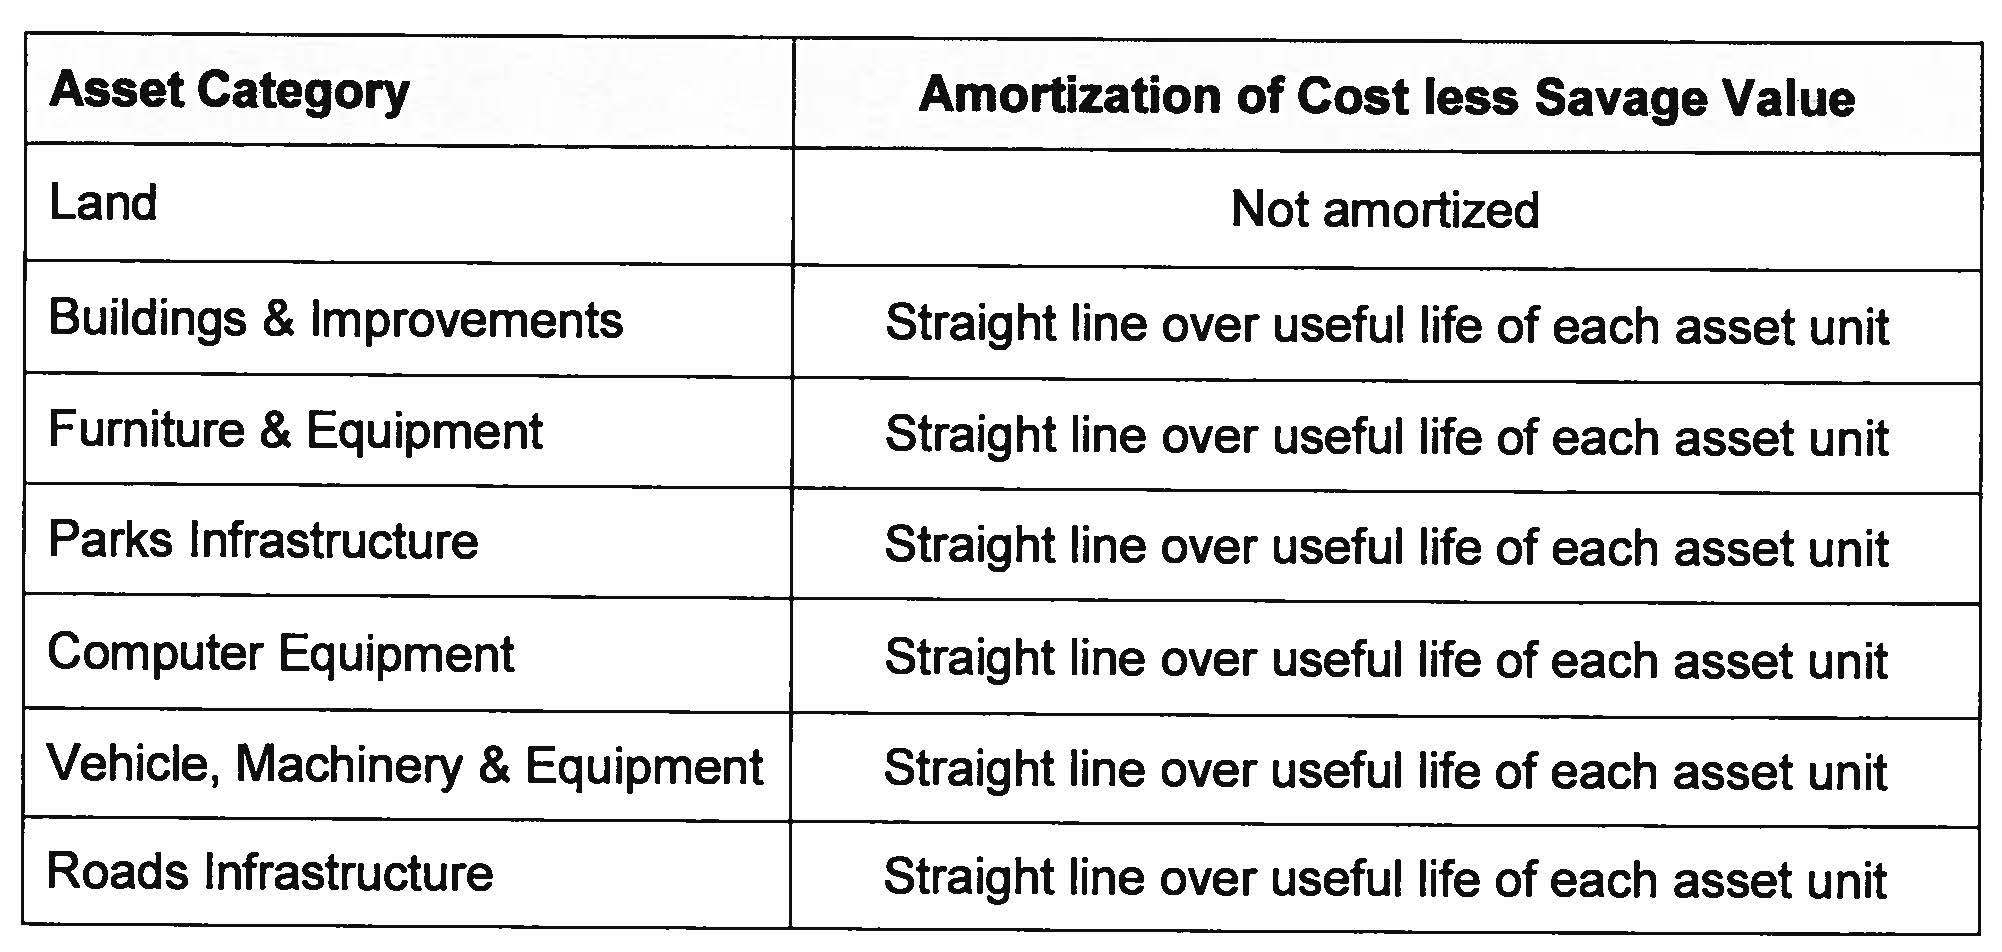 table showing the asset category and the amortization of cost less savage value